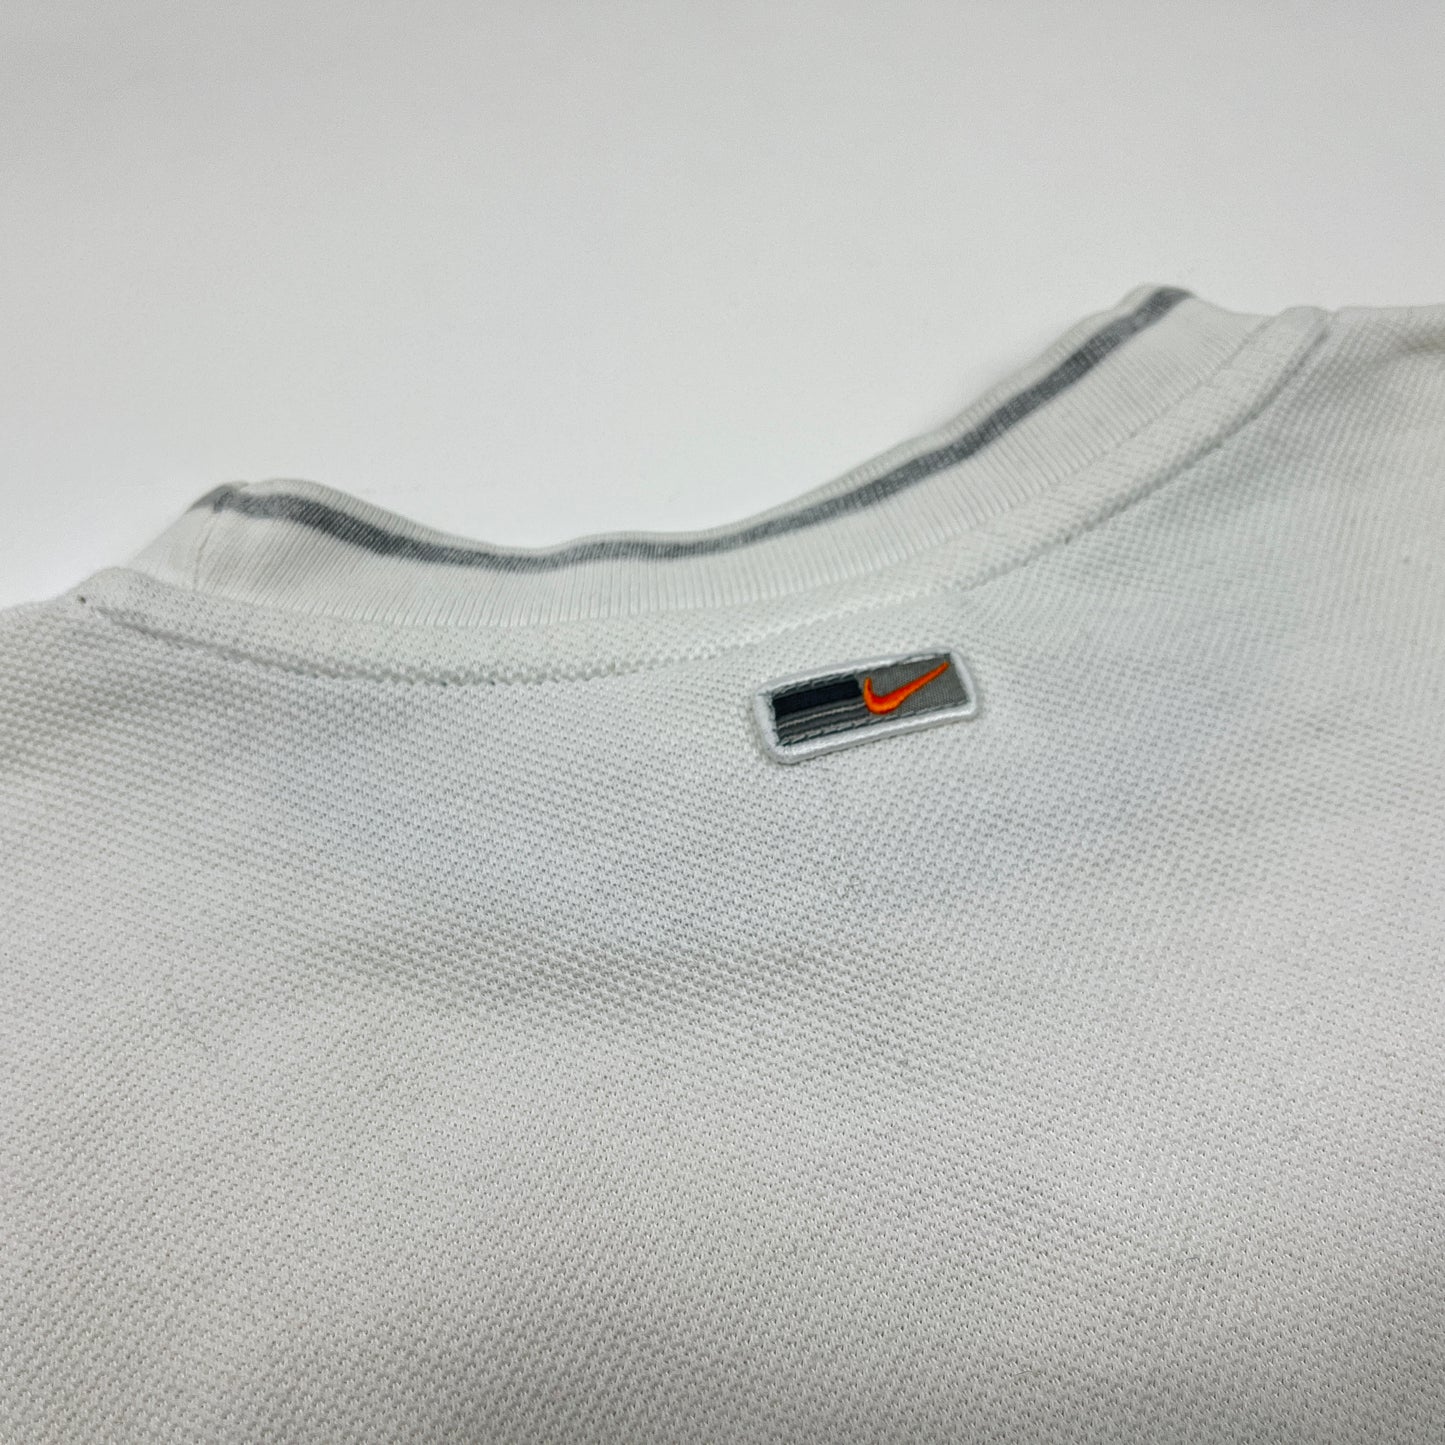 0811 Nike Vintage 90s Spellout Sweater